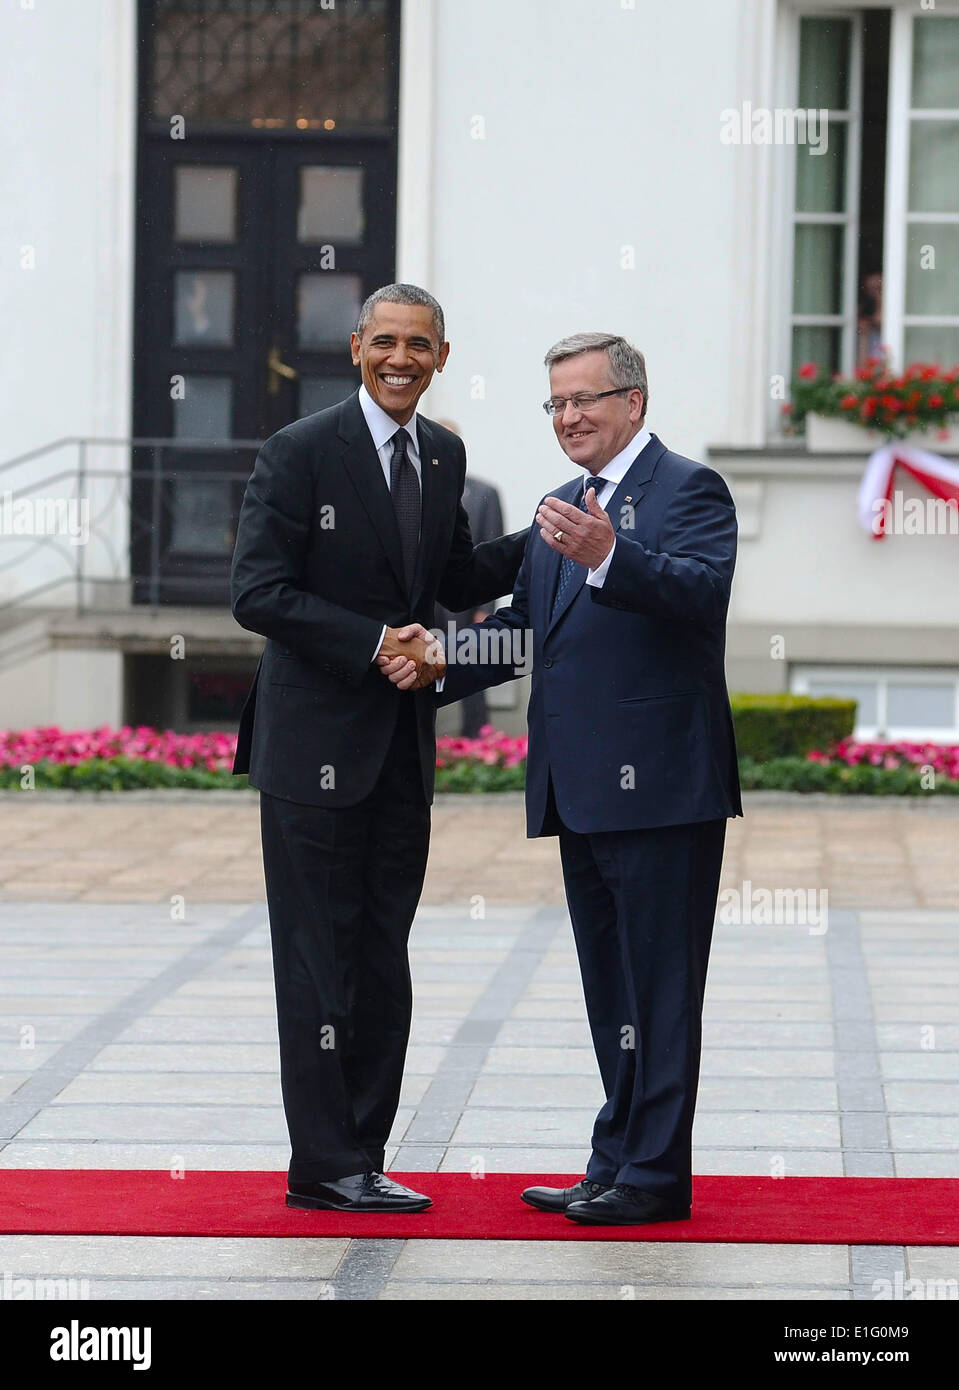 US President Barack Obama shakes hands with Polish President Bronislaw Komorowski at the Belweder Palace June 3, 2014 in Warsaw, Poland. The president's visit to Warsaw coincides with the 25th anniversary of Poland emerging from communism. Stock Photo